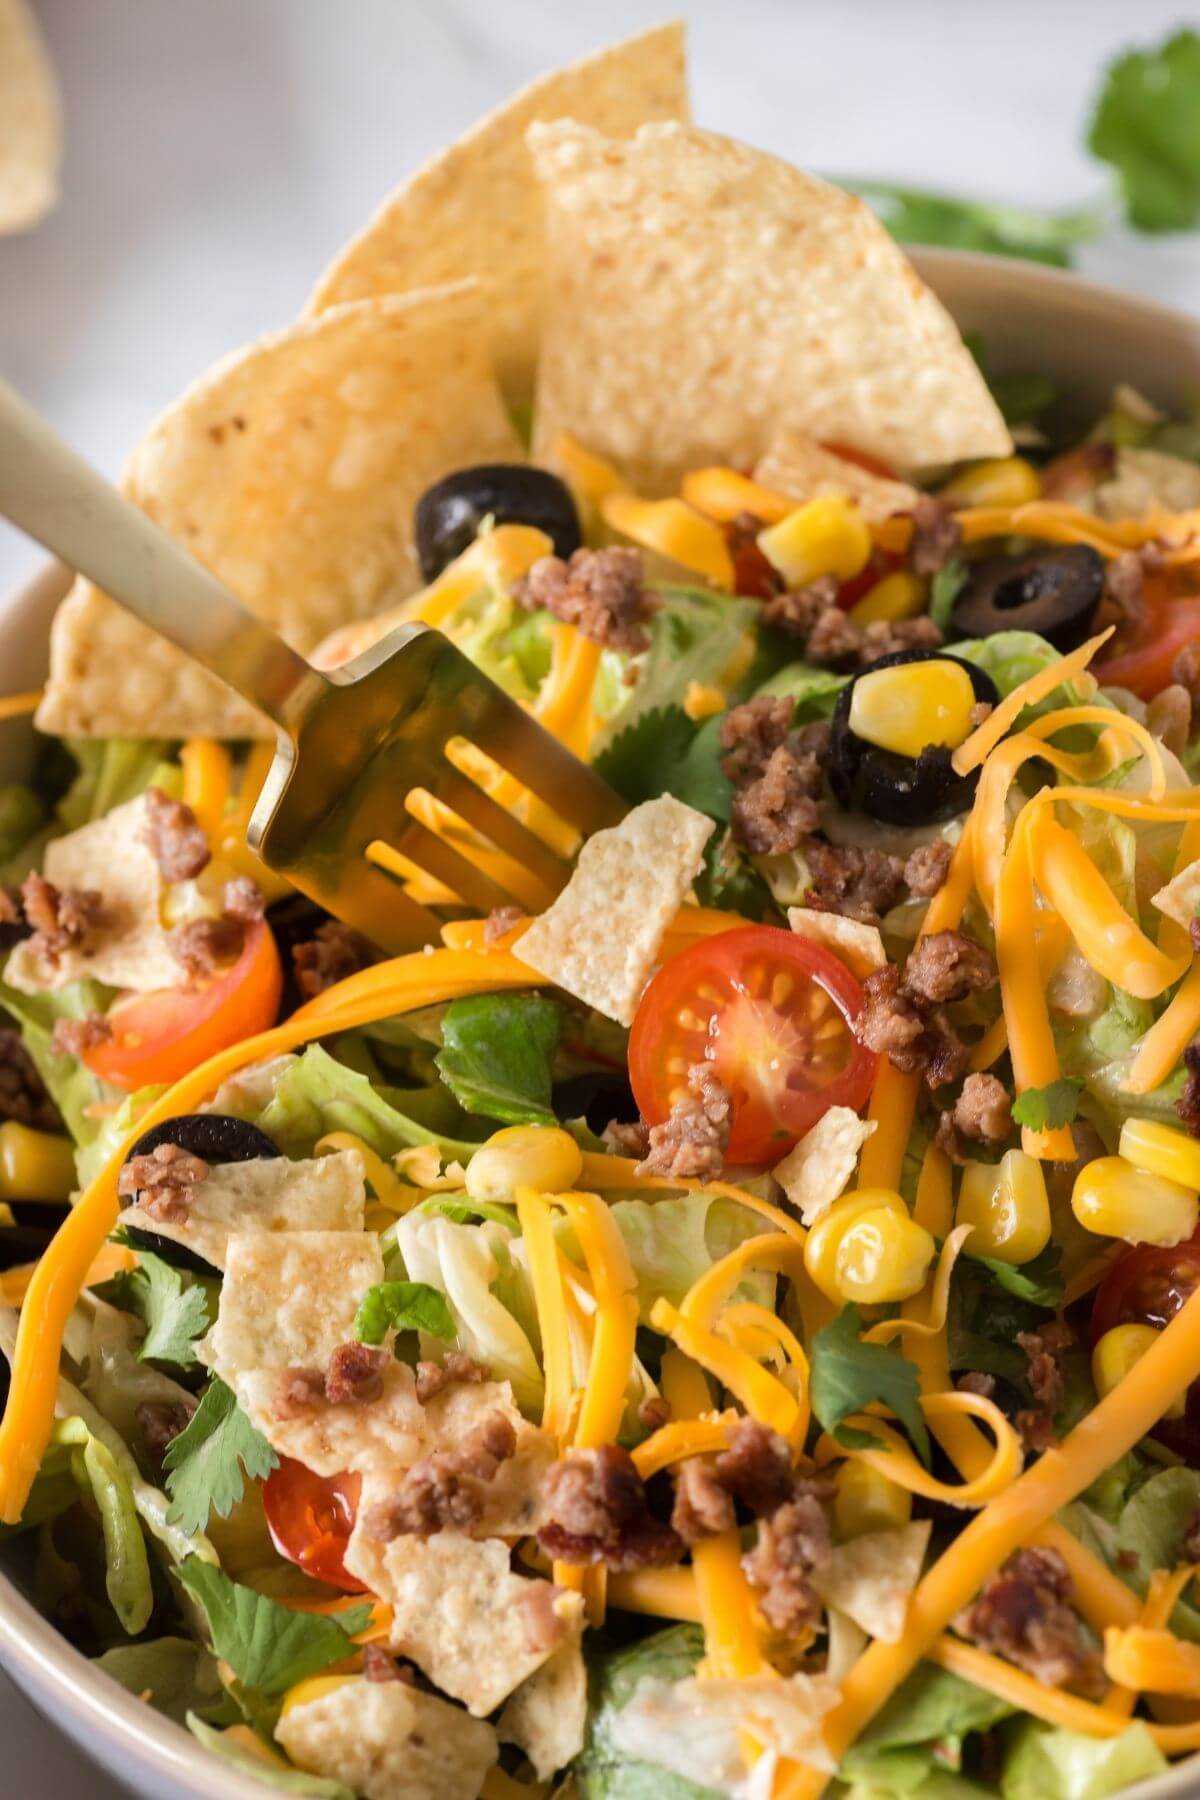 A fork dives into a full bowl of salad with cheese, tomatoes, lettuce, beef, and beans.